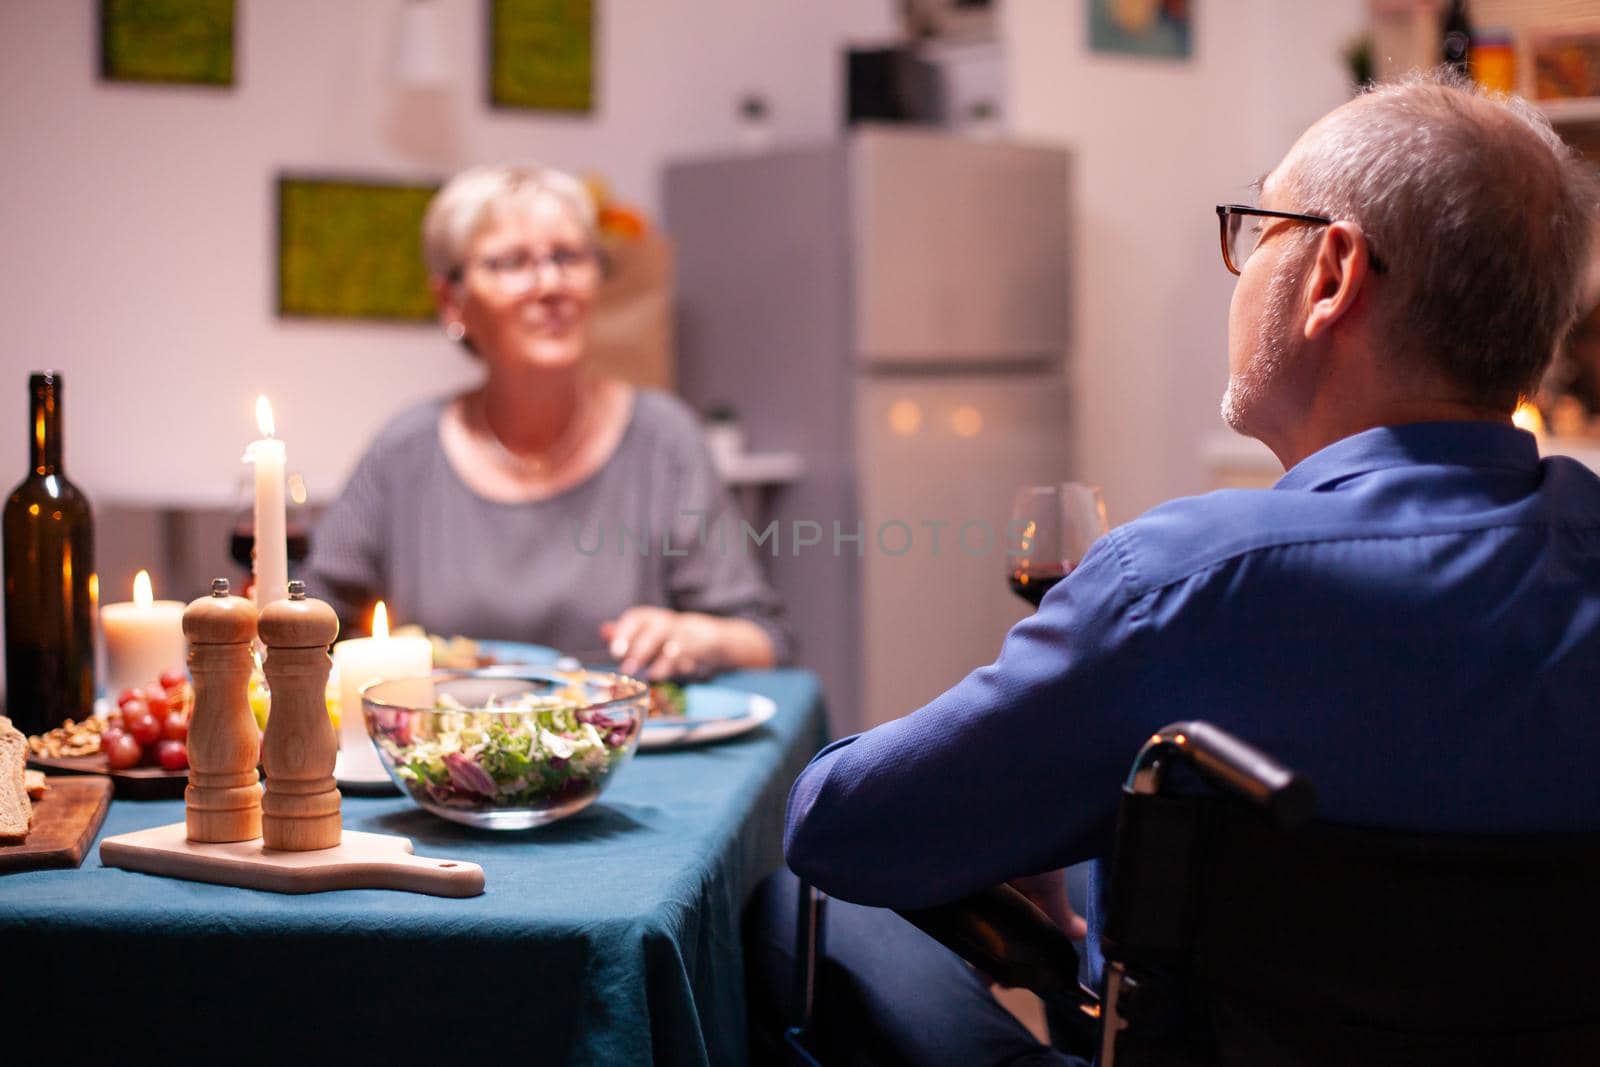 Handicapped man holding whine glass sitting in wheelchair during festive dinner. Happy cheerful senior elderly couple dining together in the cozy kitchen, enjoying the meal, celebrating their anniversary.